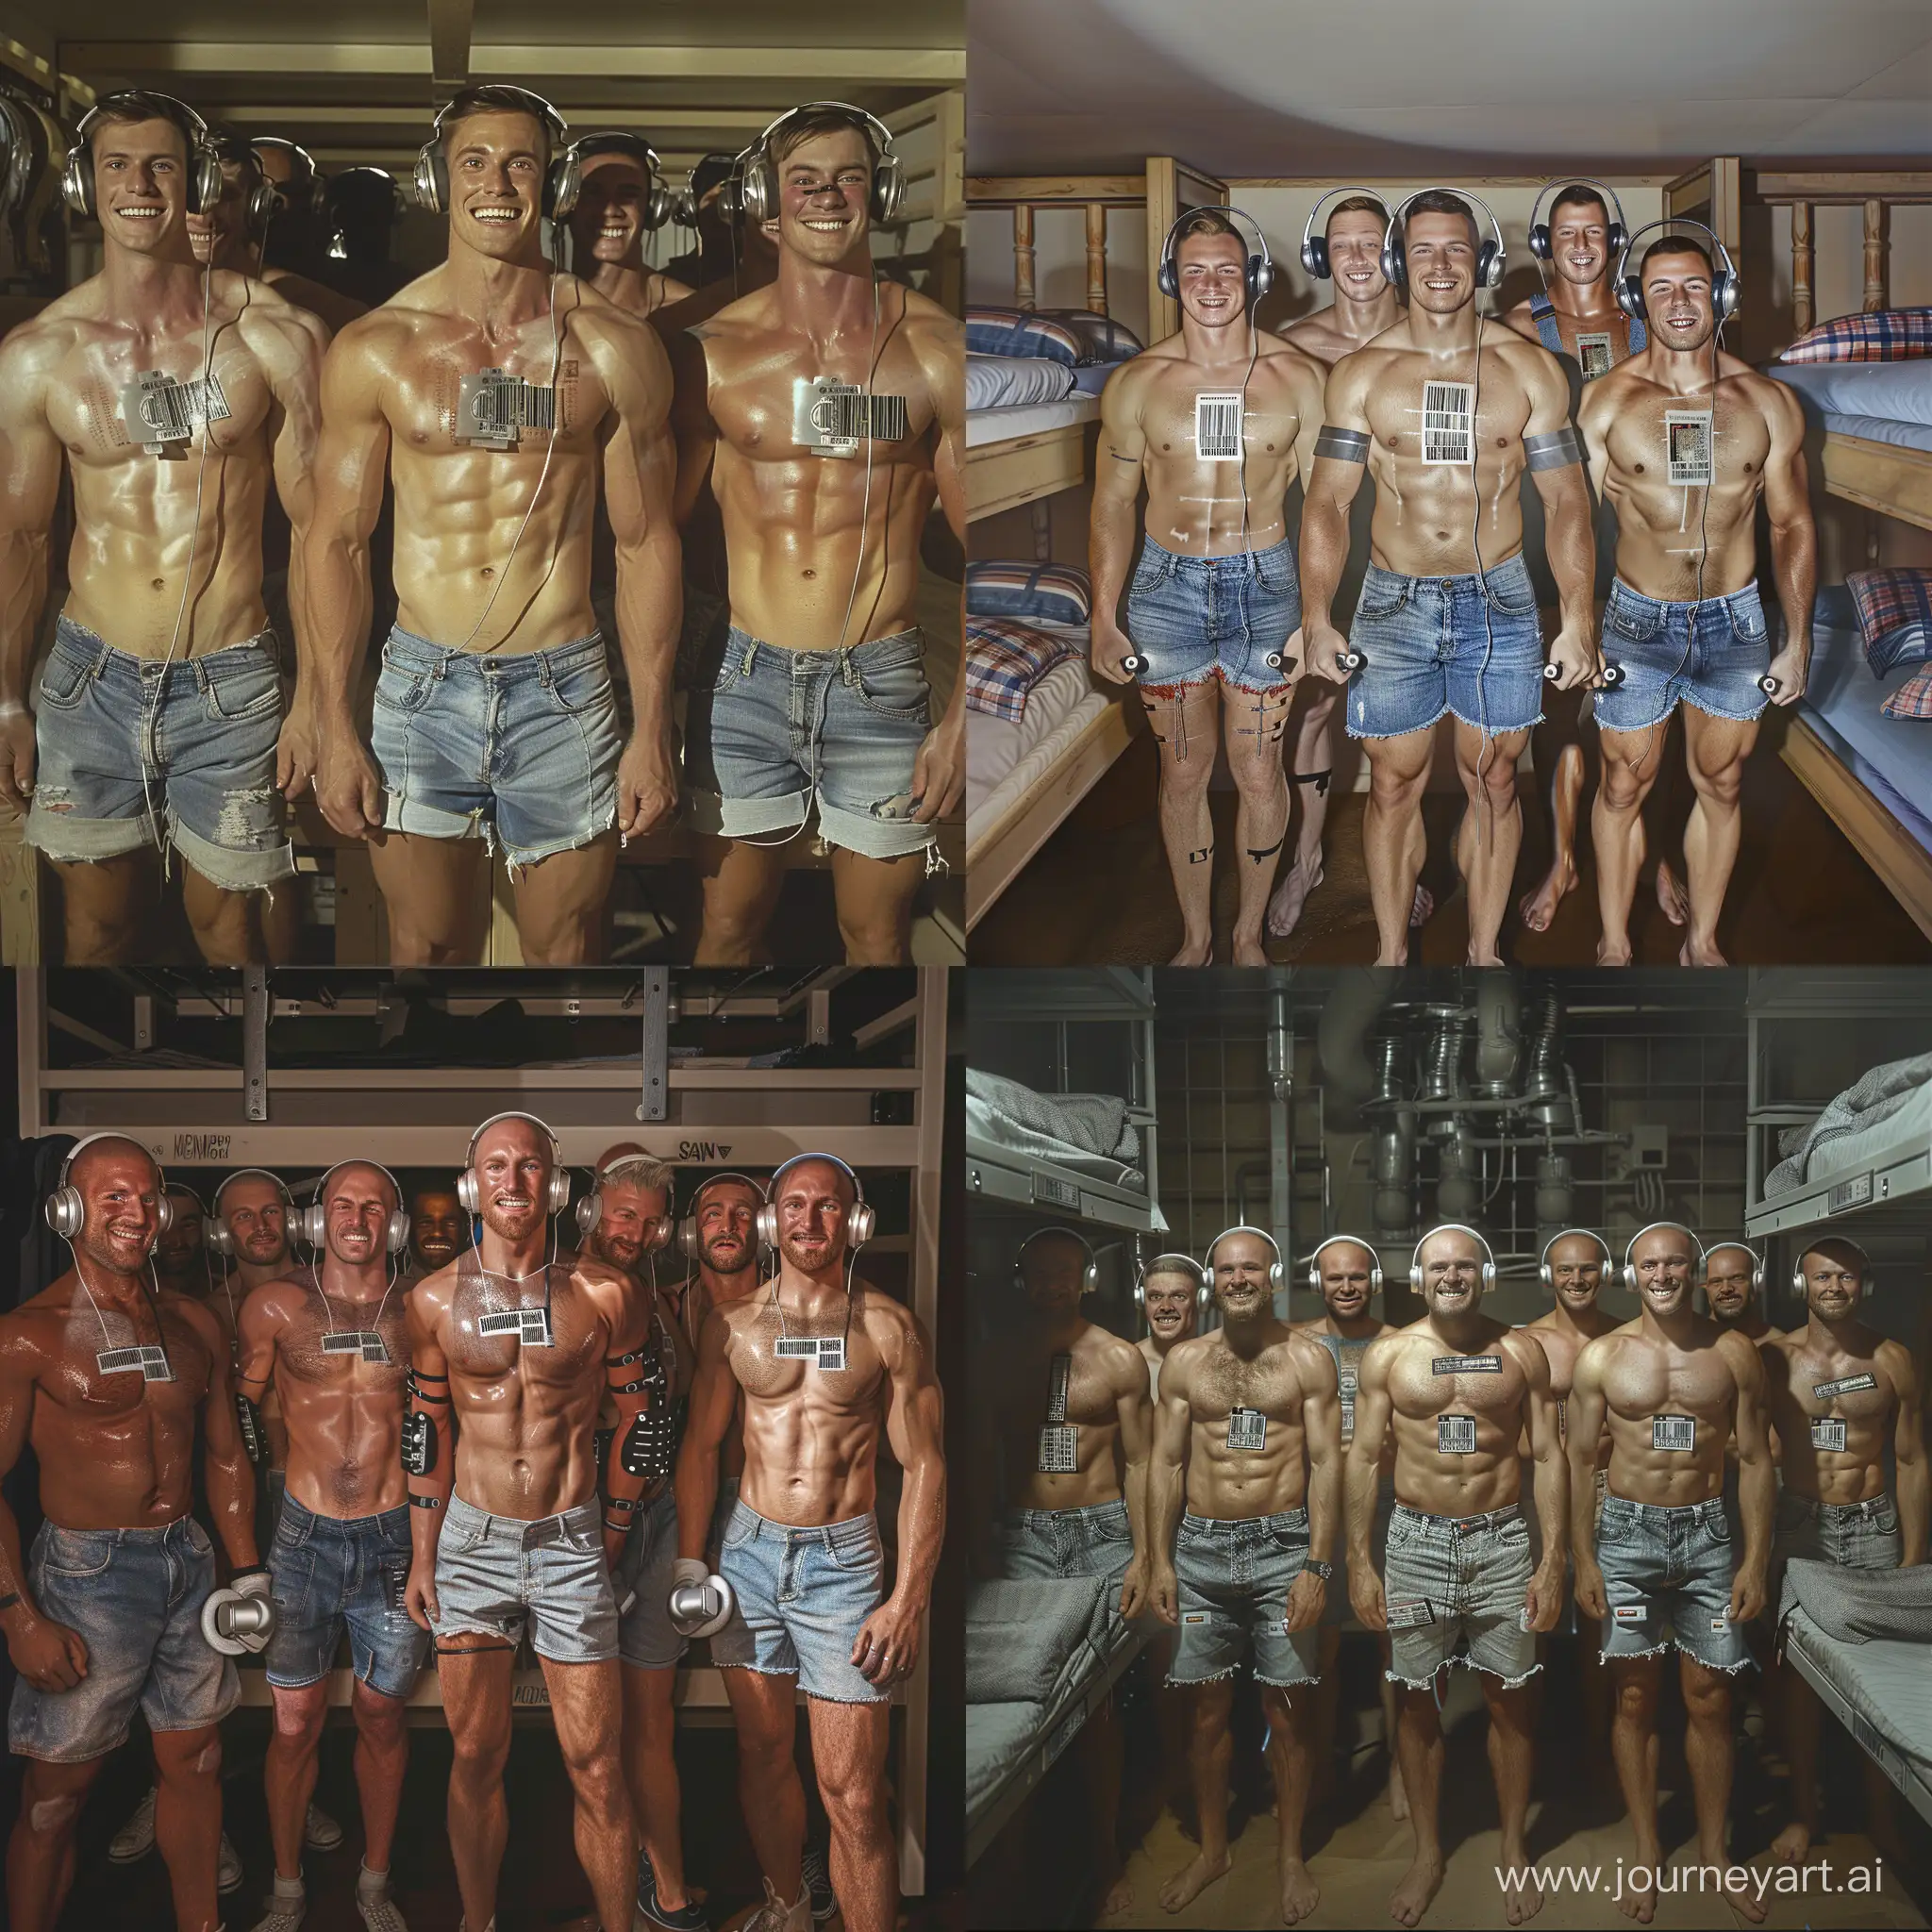 Handsome muscular men of all ages each wear silver headphones and fitted denim cutoff shorts, dazed smiles, small barcode attached to each man's chest, youth hostel dormitory bunkbed setting, facing the viewer, mass indoctrination, color image, hyperrealistic, cinematic